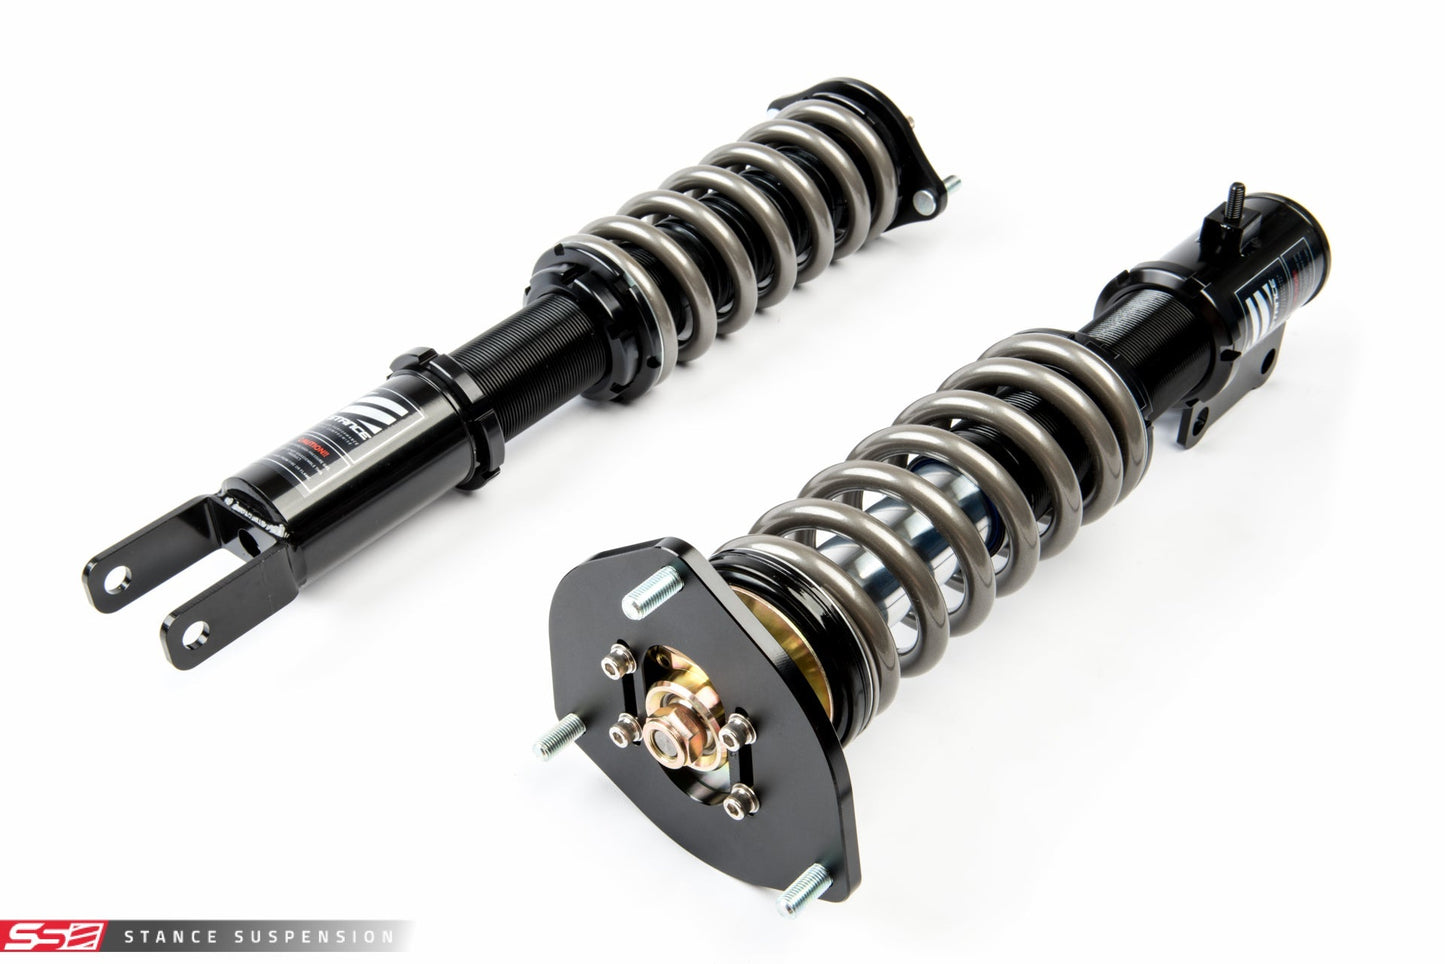 Stance Suspension - XR1 Coilovers for Mitsubishi Evolution CT9A (ST-CT9A-XR1)